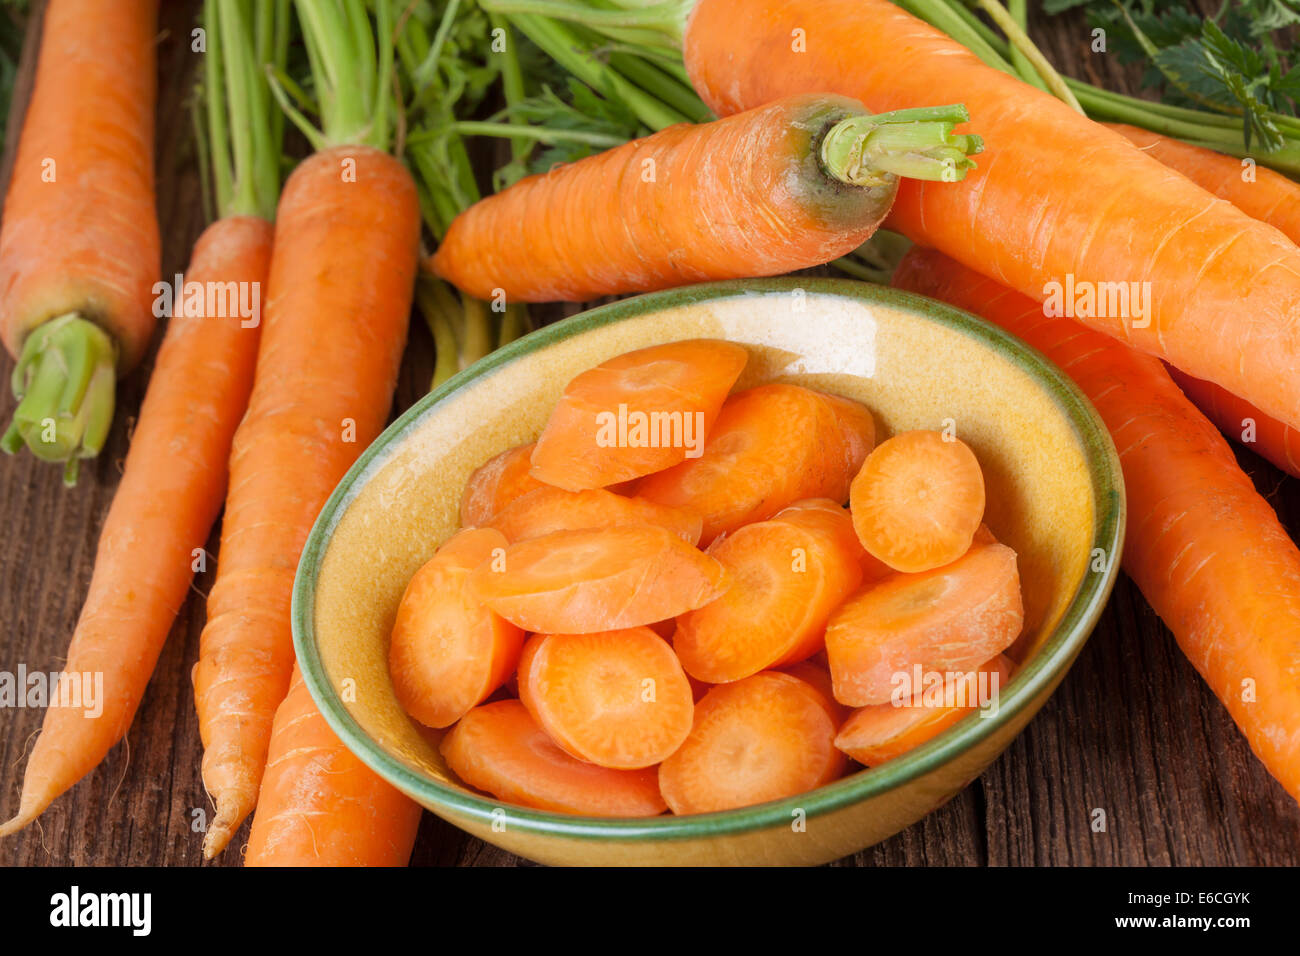 Carrot on a wooden background Stock Photo